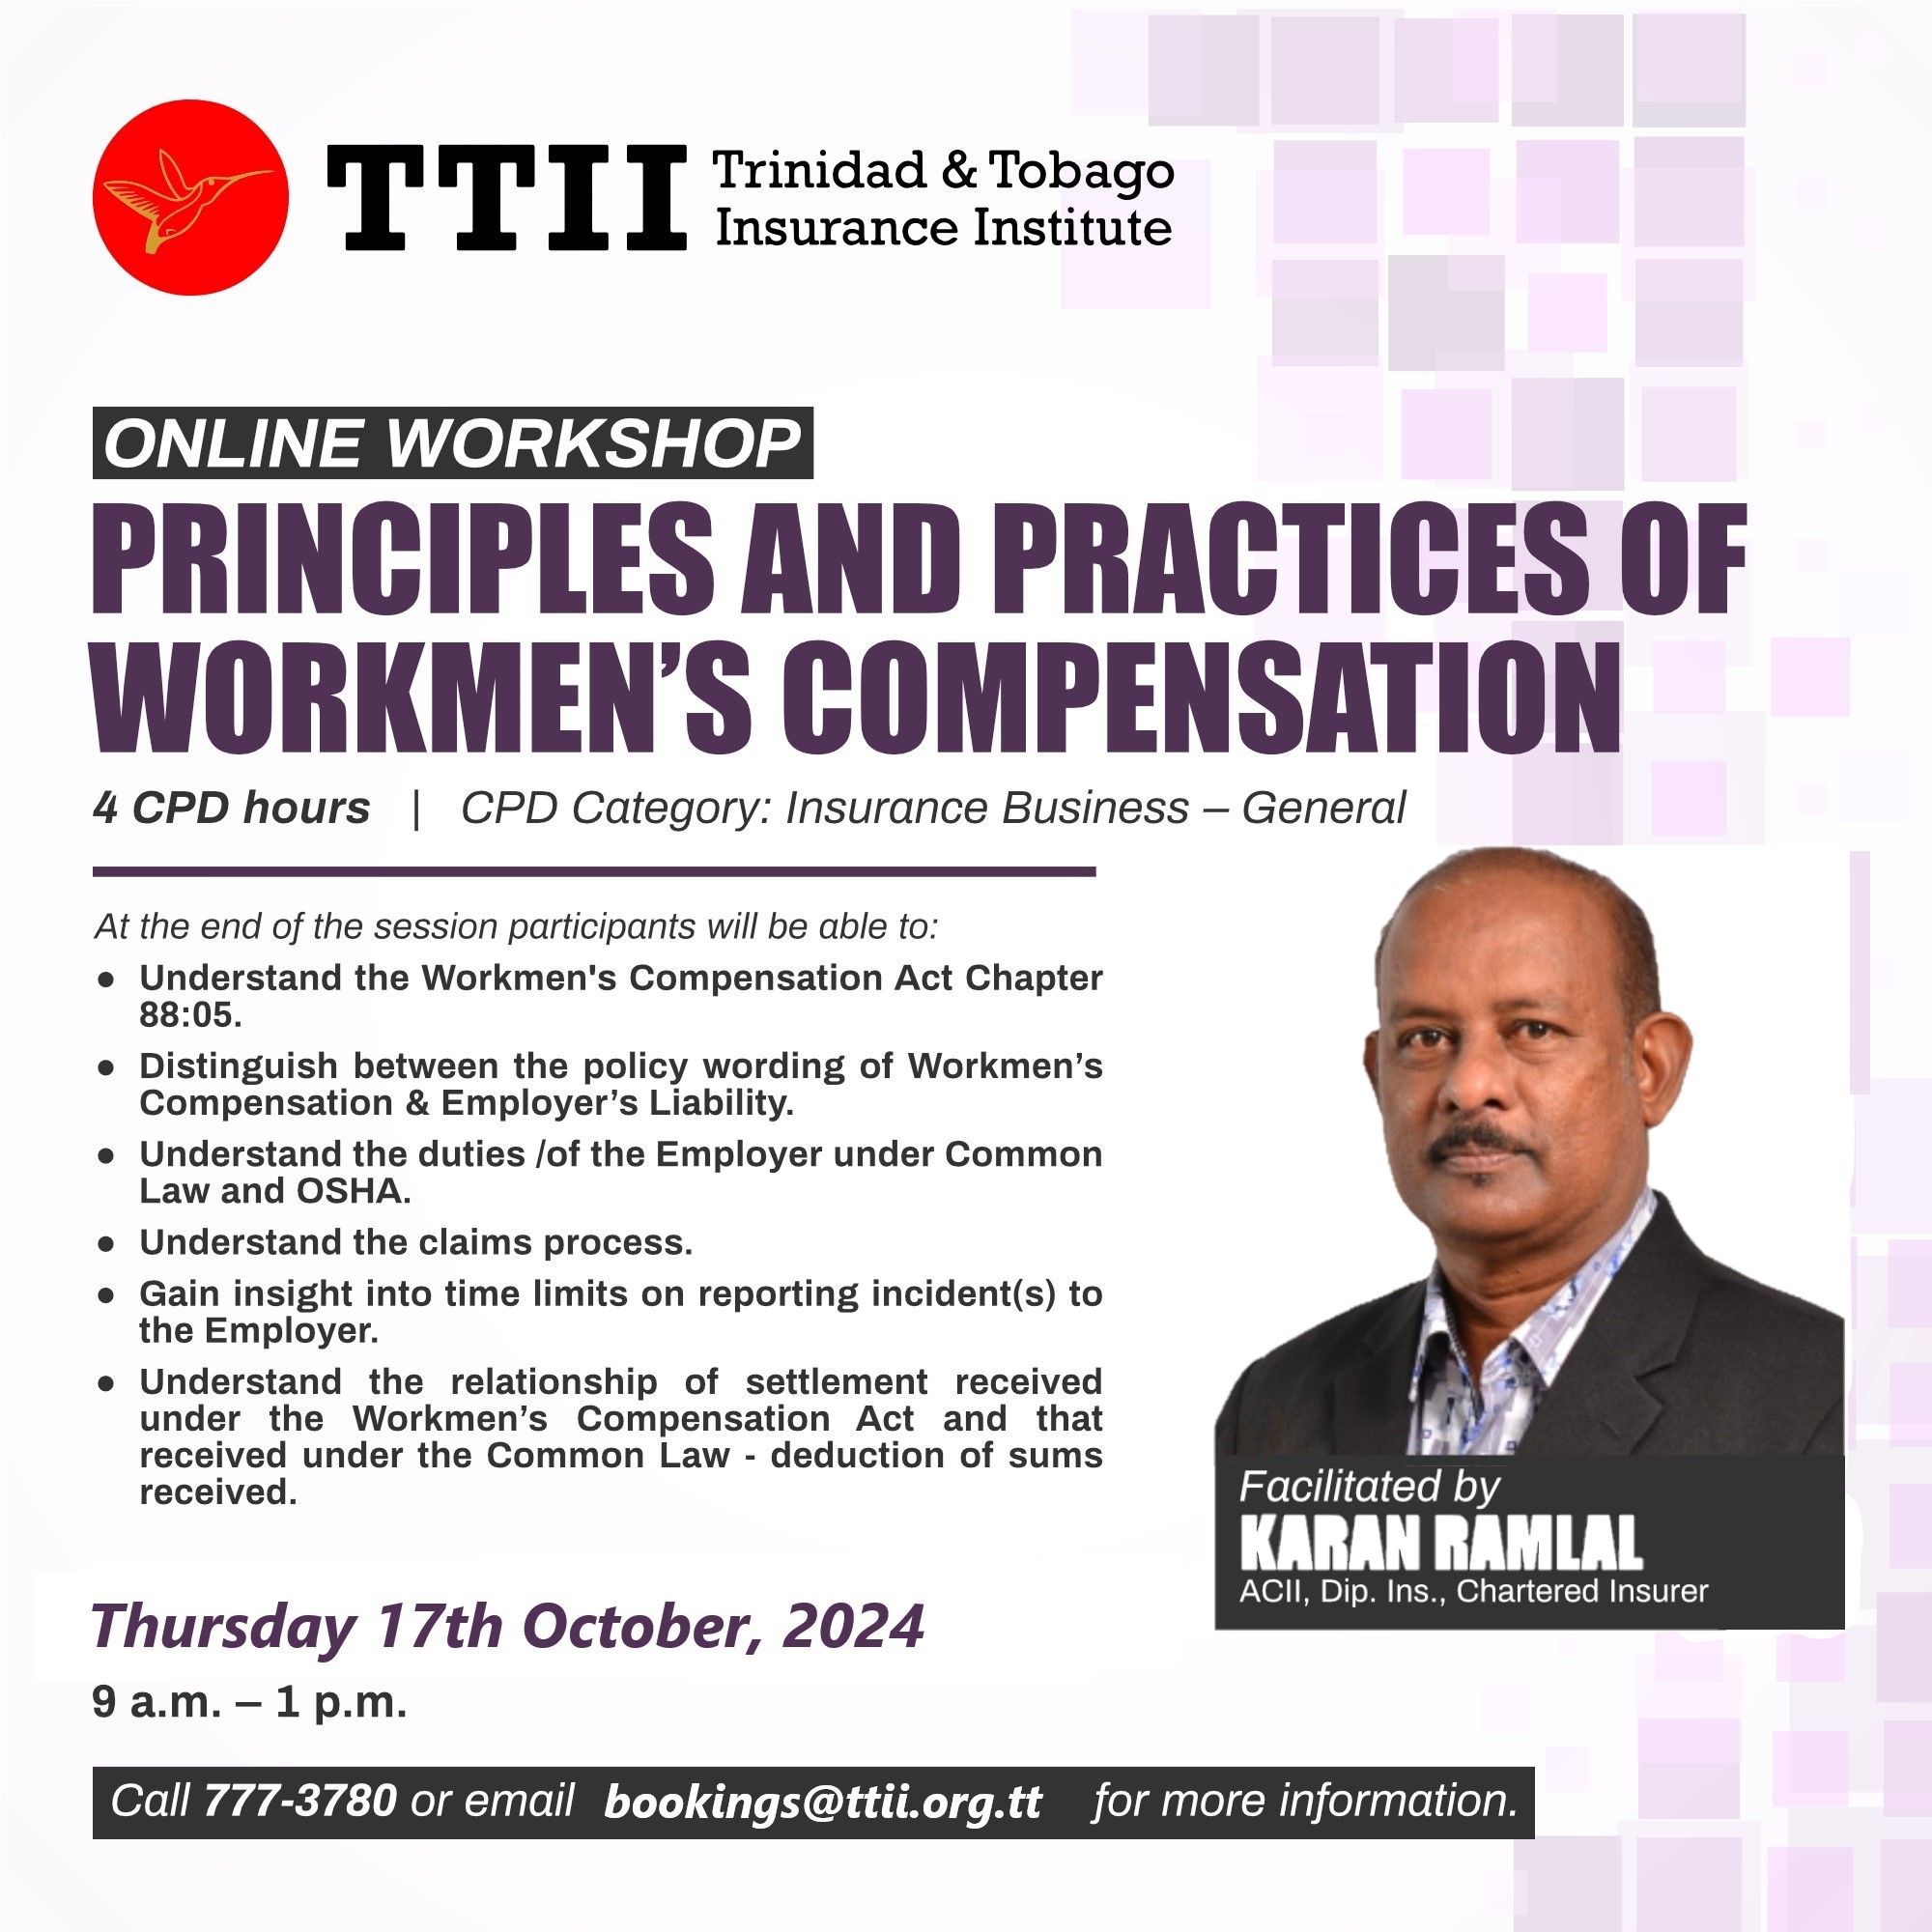 Principles and Practices of Workmen’s Compensation